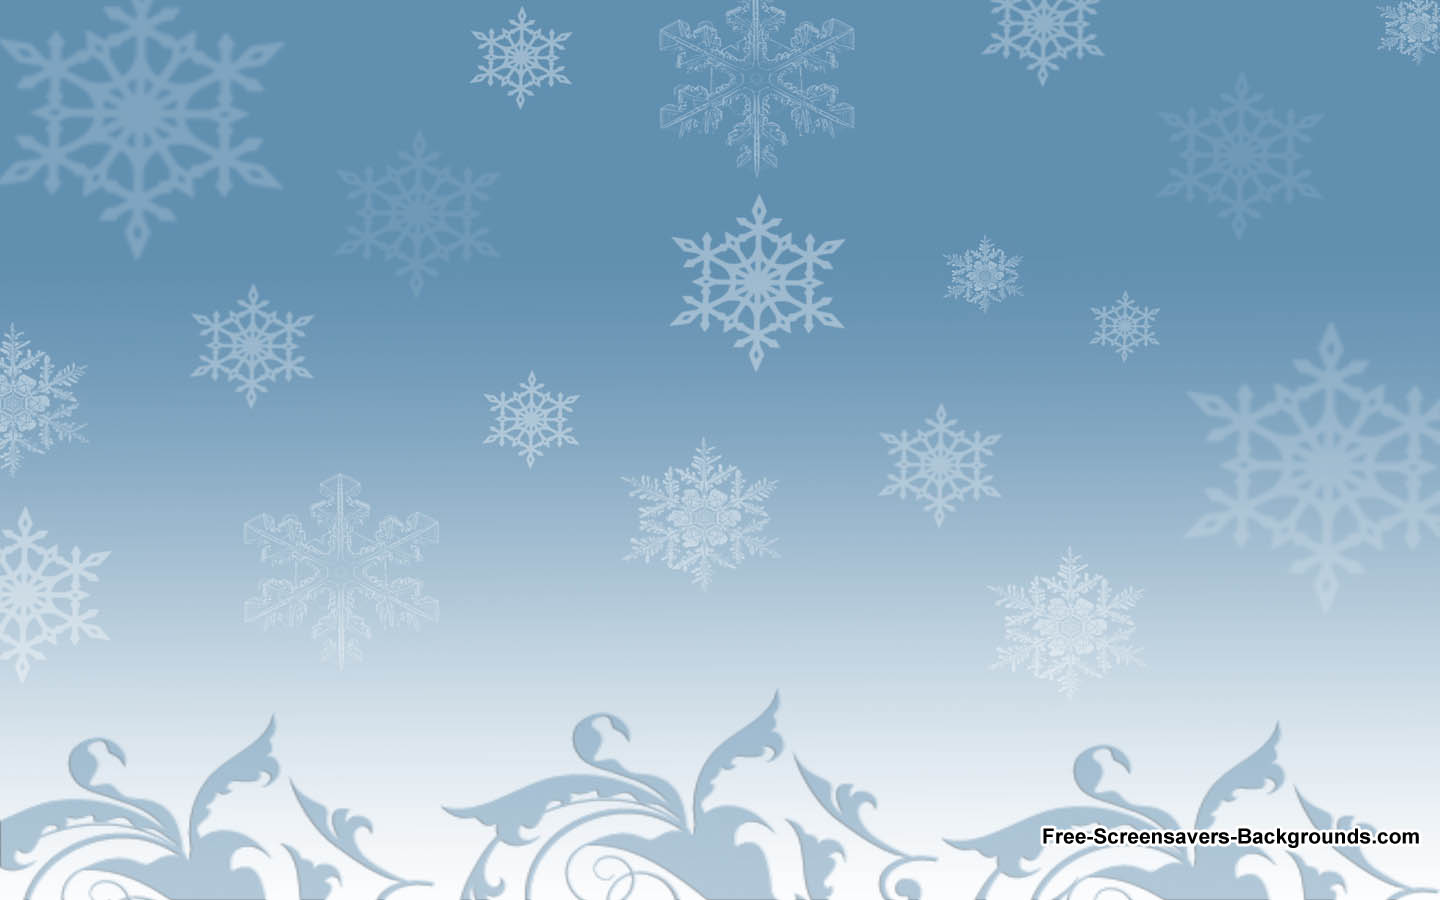 Snow Flakes Design Wallpaper Screensavers And Background